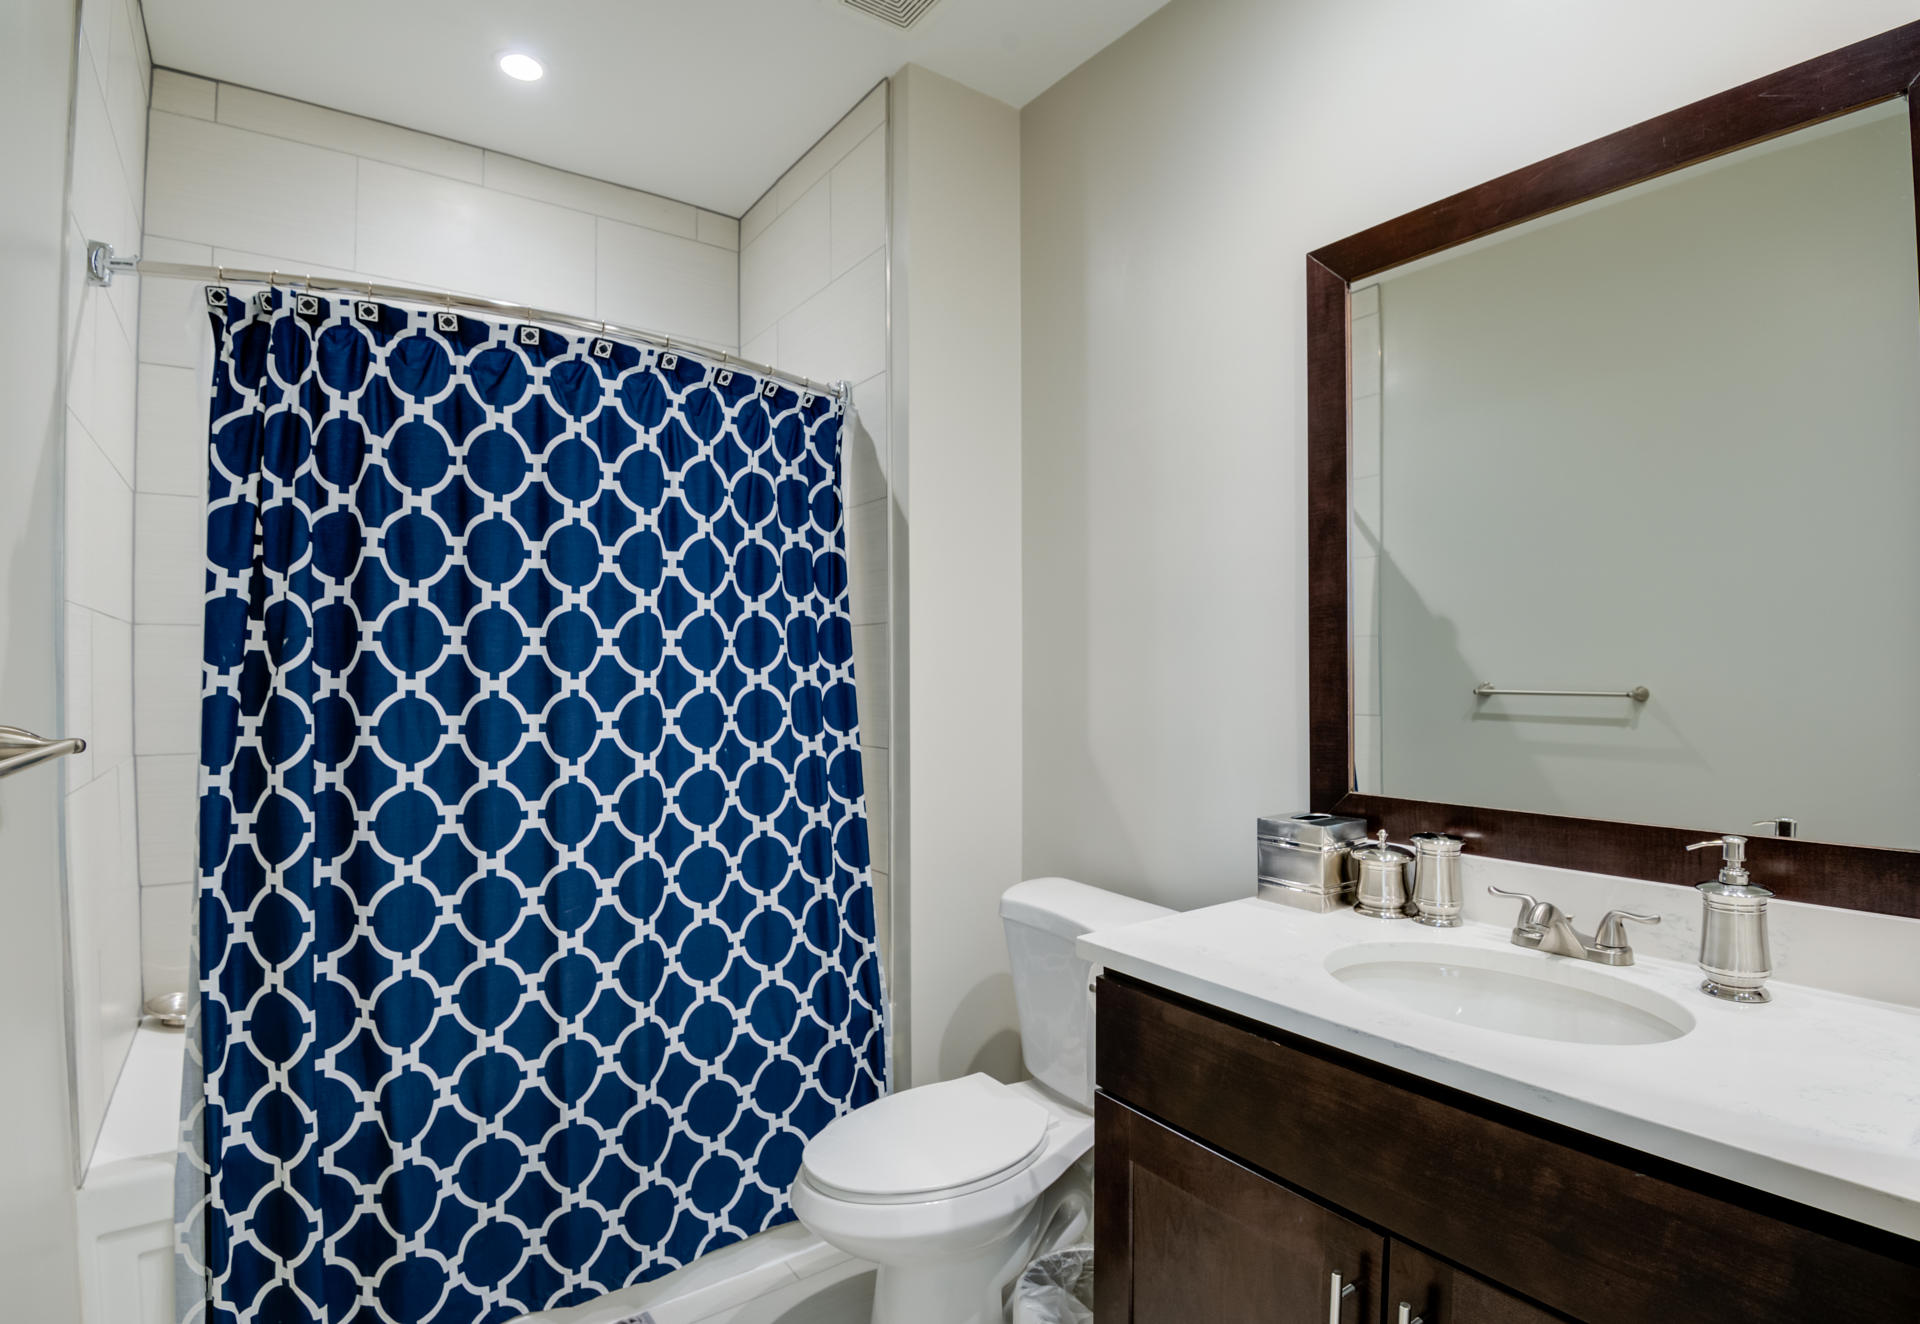 Modern bathroom features help start your day in style.